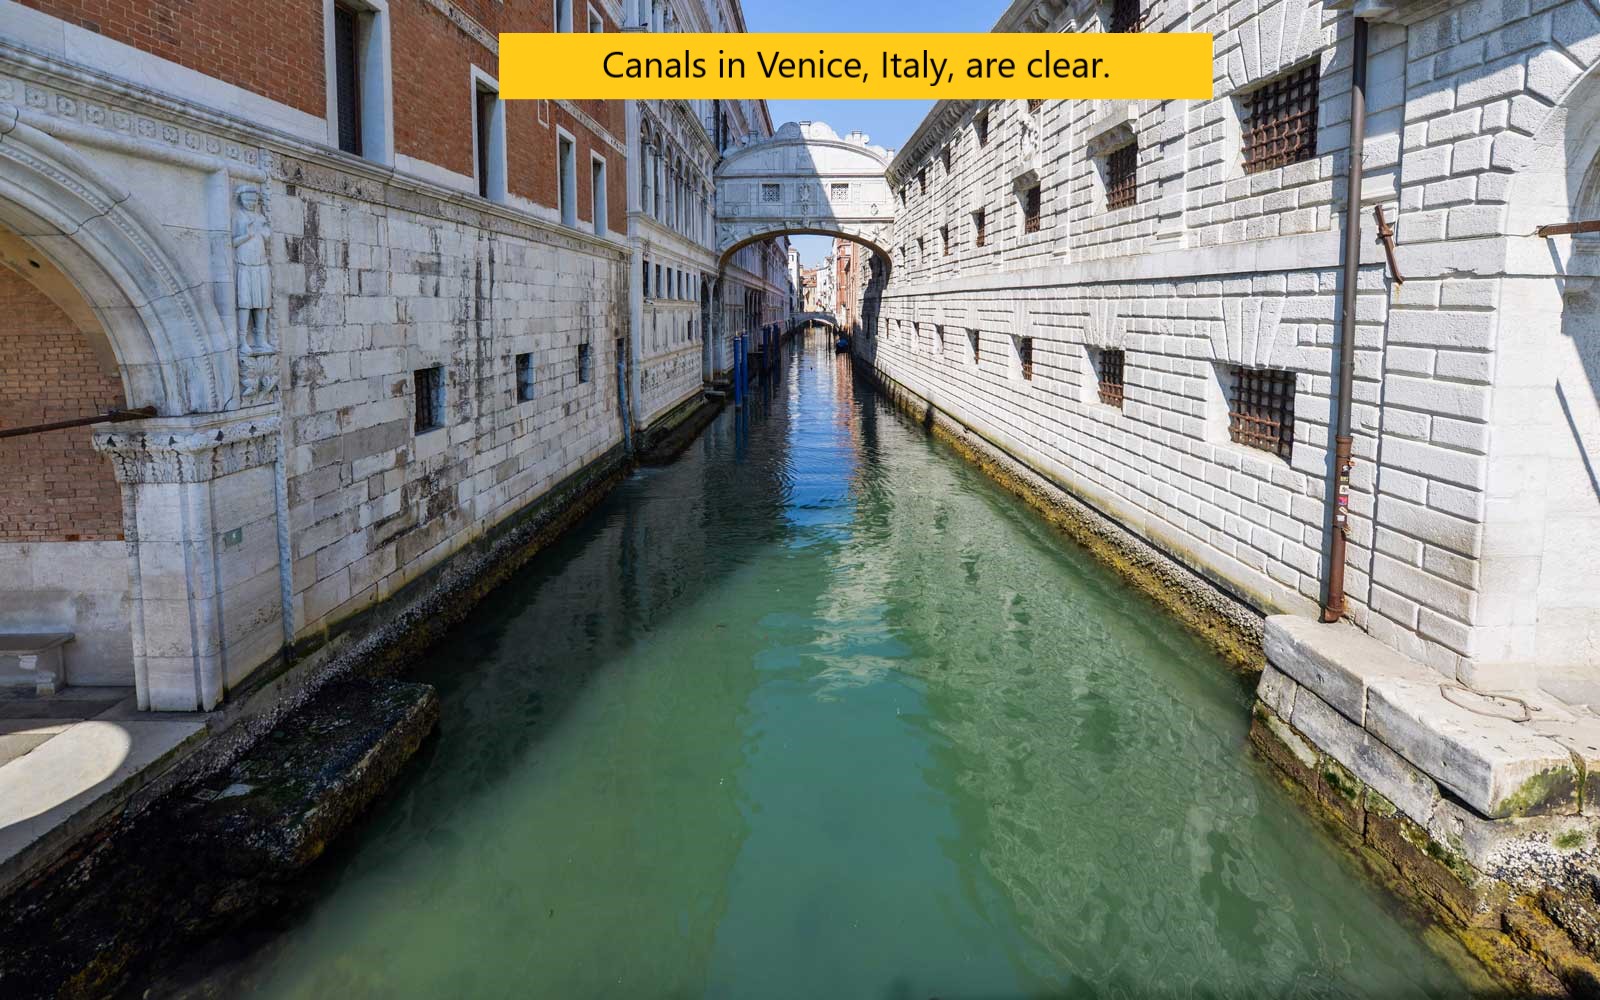 bridge of sighs - Canals in Venice, Italy, are clear.